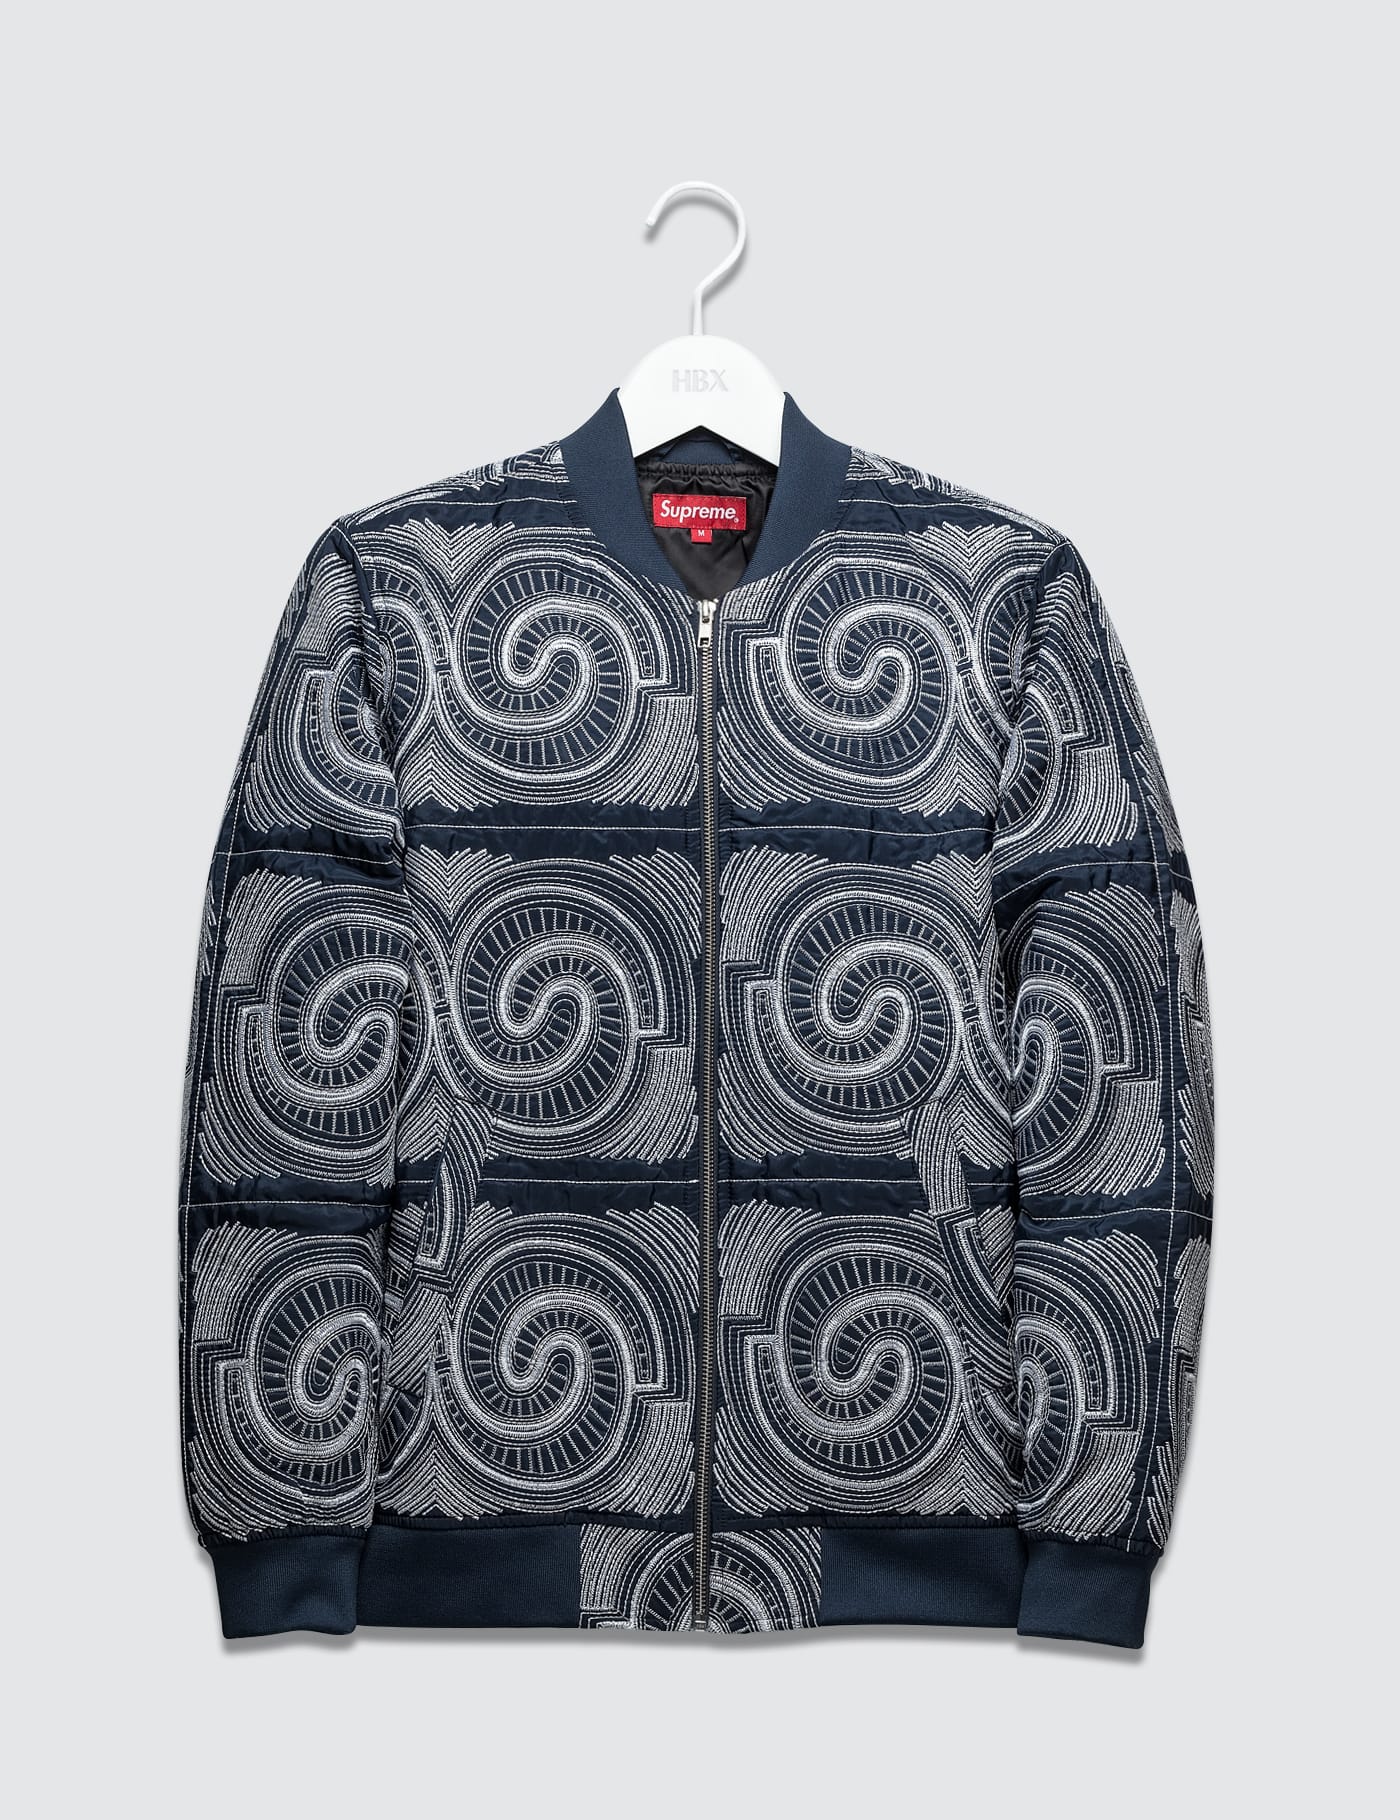 Supreme - 2014 Uptown Jacket | HBX - Globally Curated Fashion and